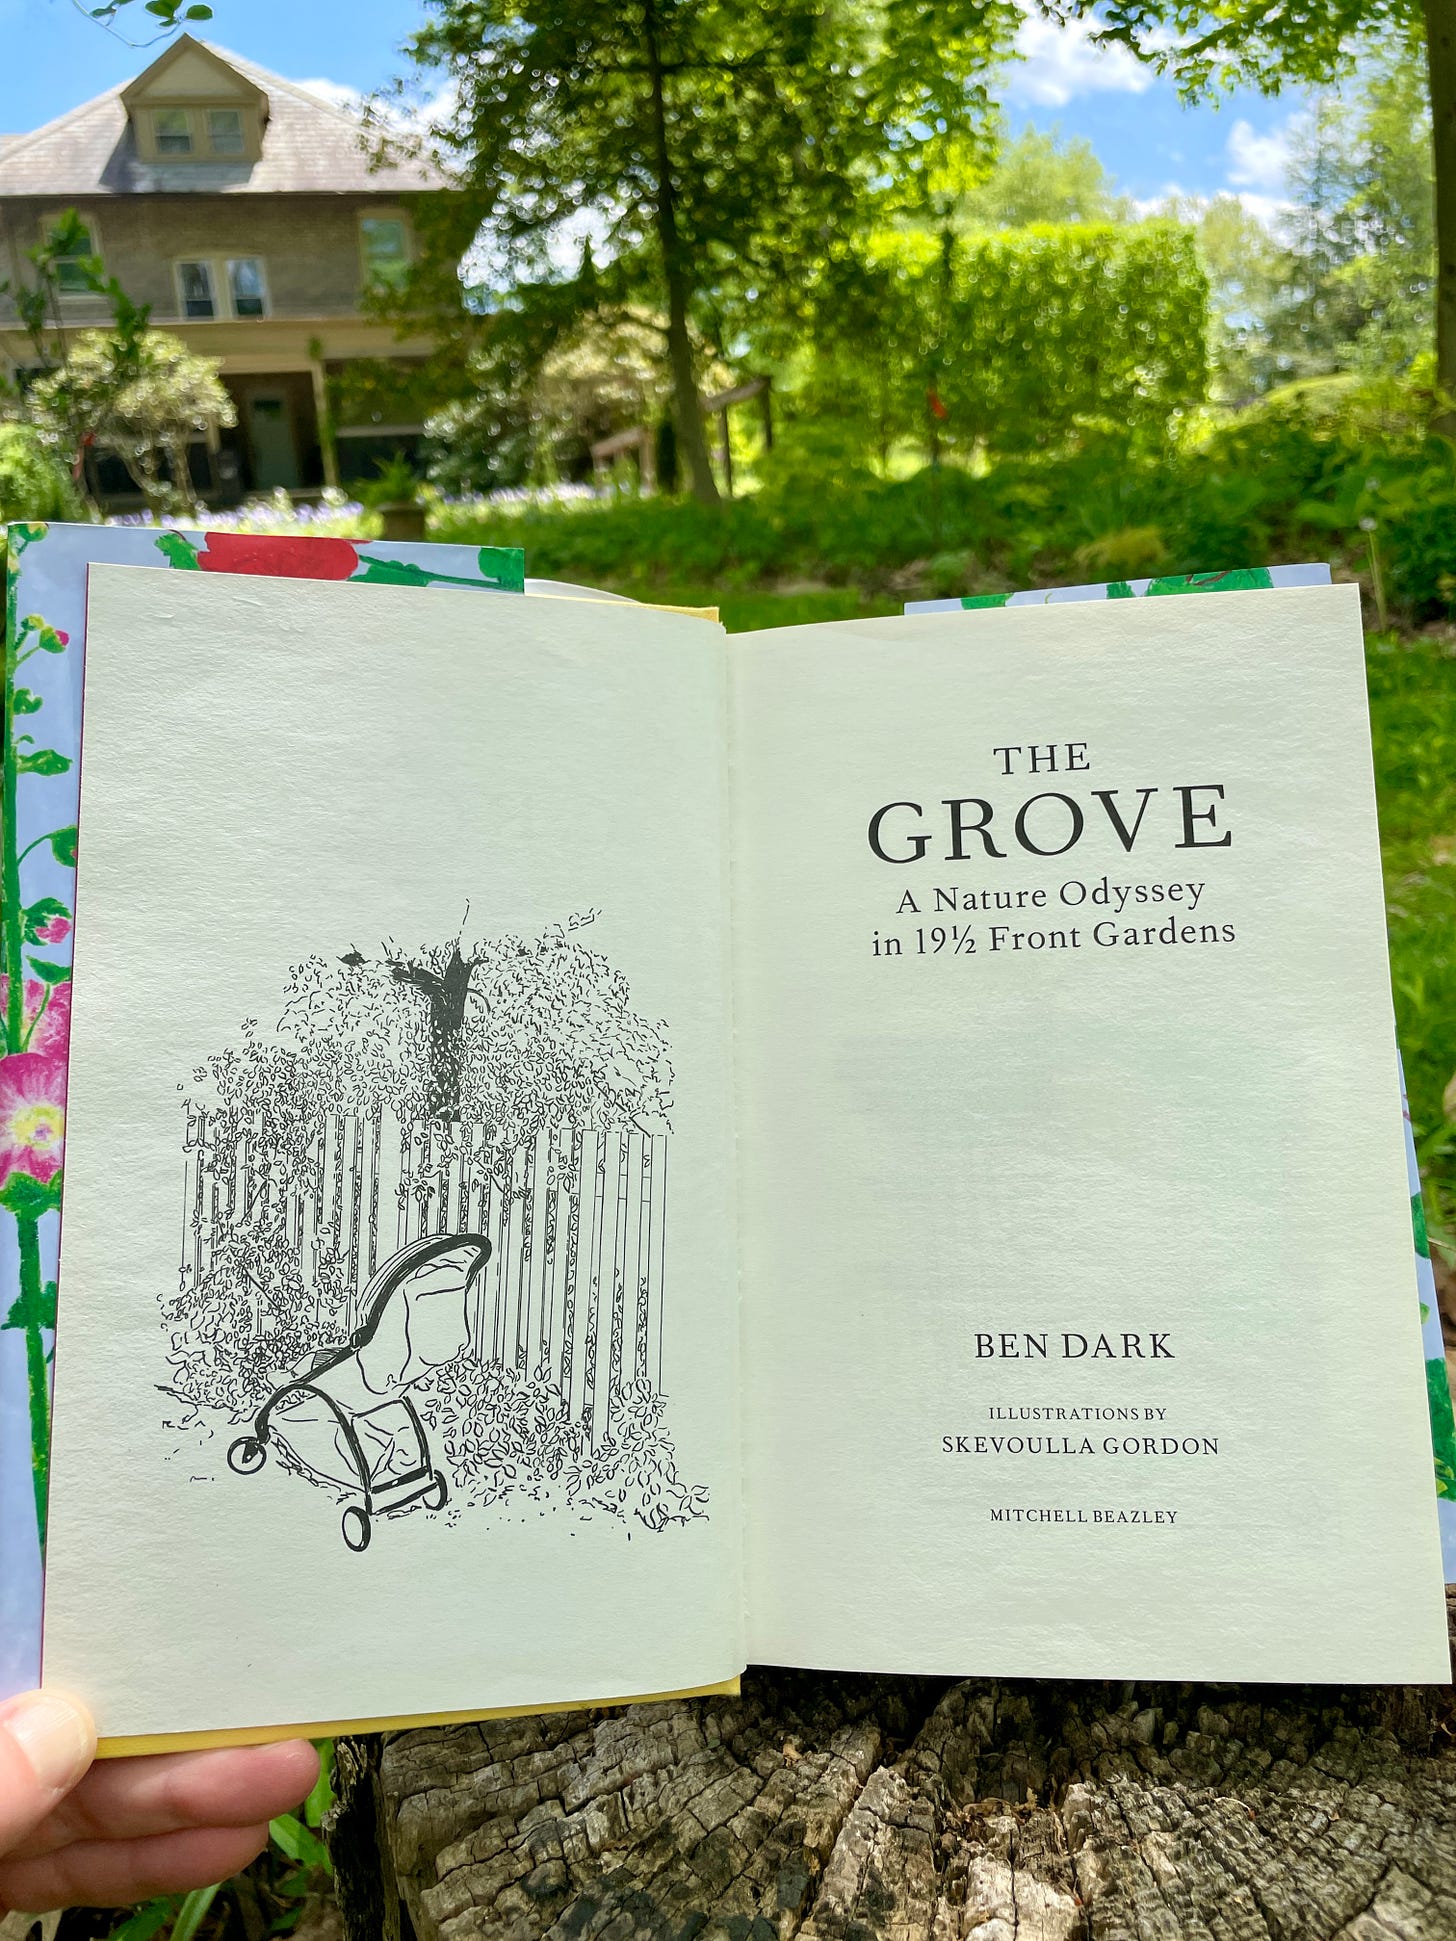 The title page and first illustration by Skevoulla Gordon in The Grove by Ben Dark.